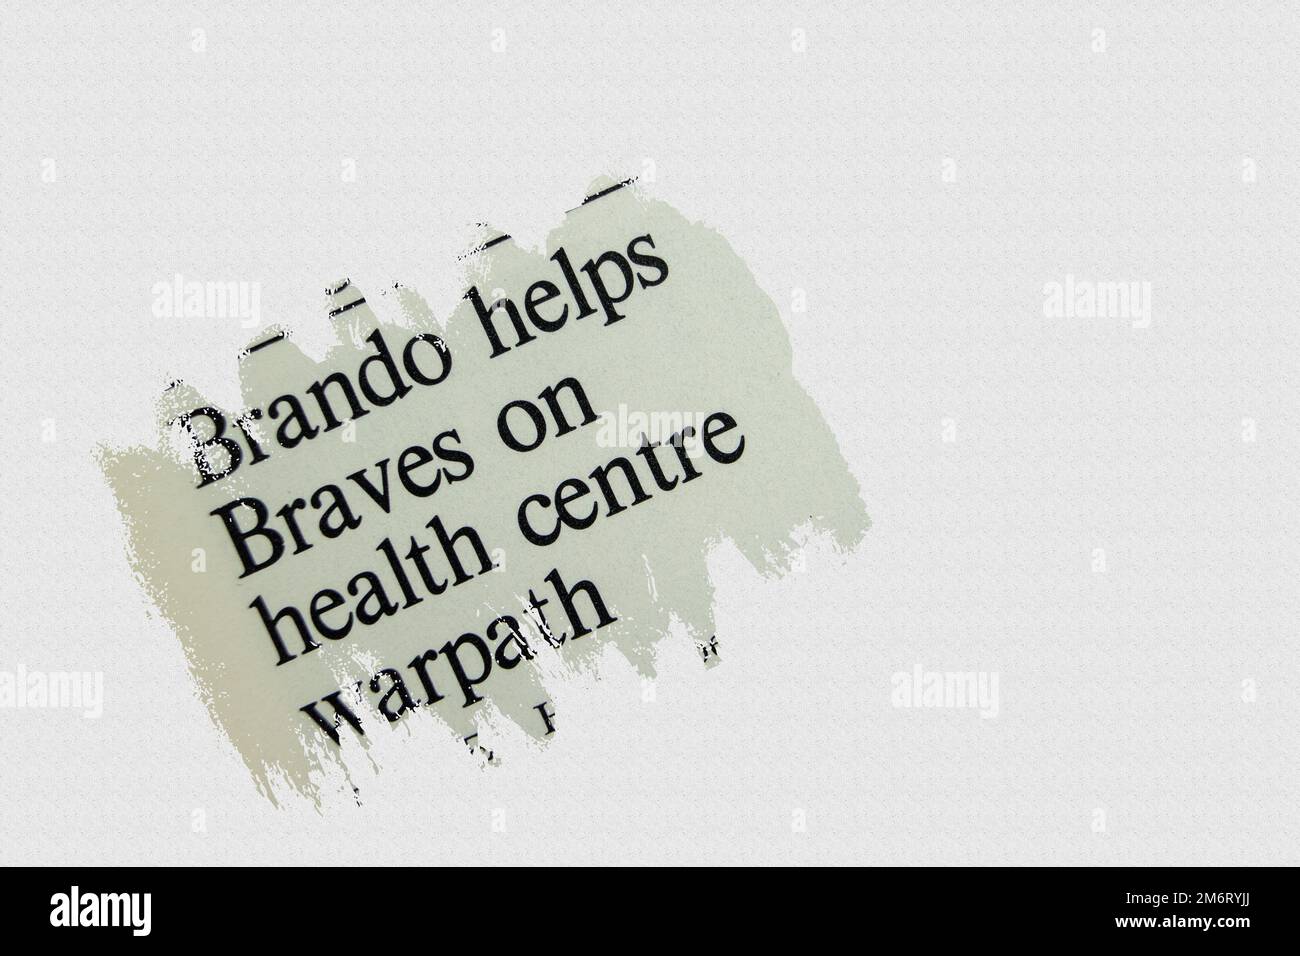 news story from 1975 newspaper headline article title - Brando helps Braves on health centre warpath Stock Photo